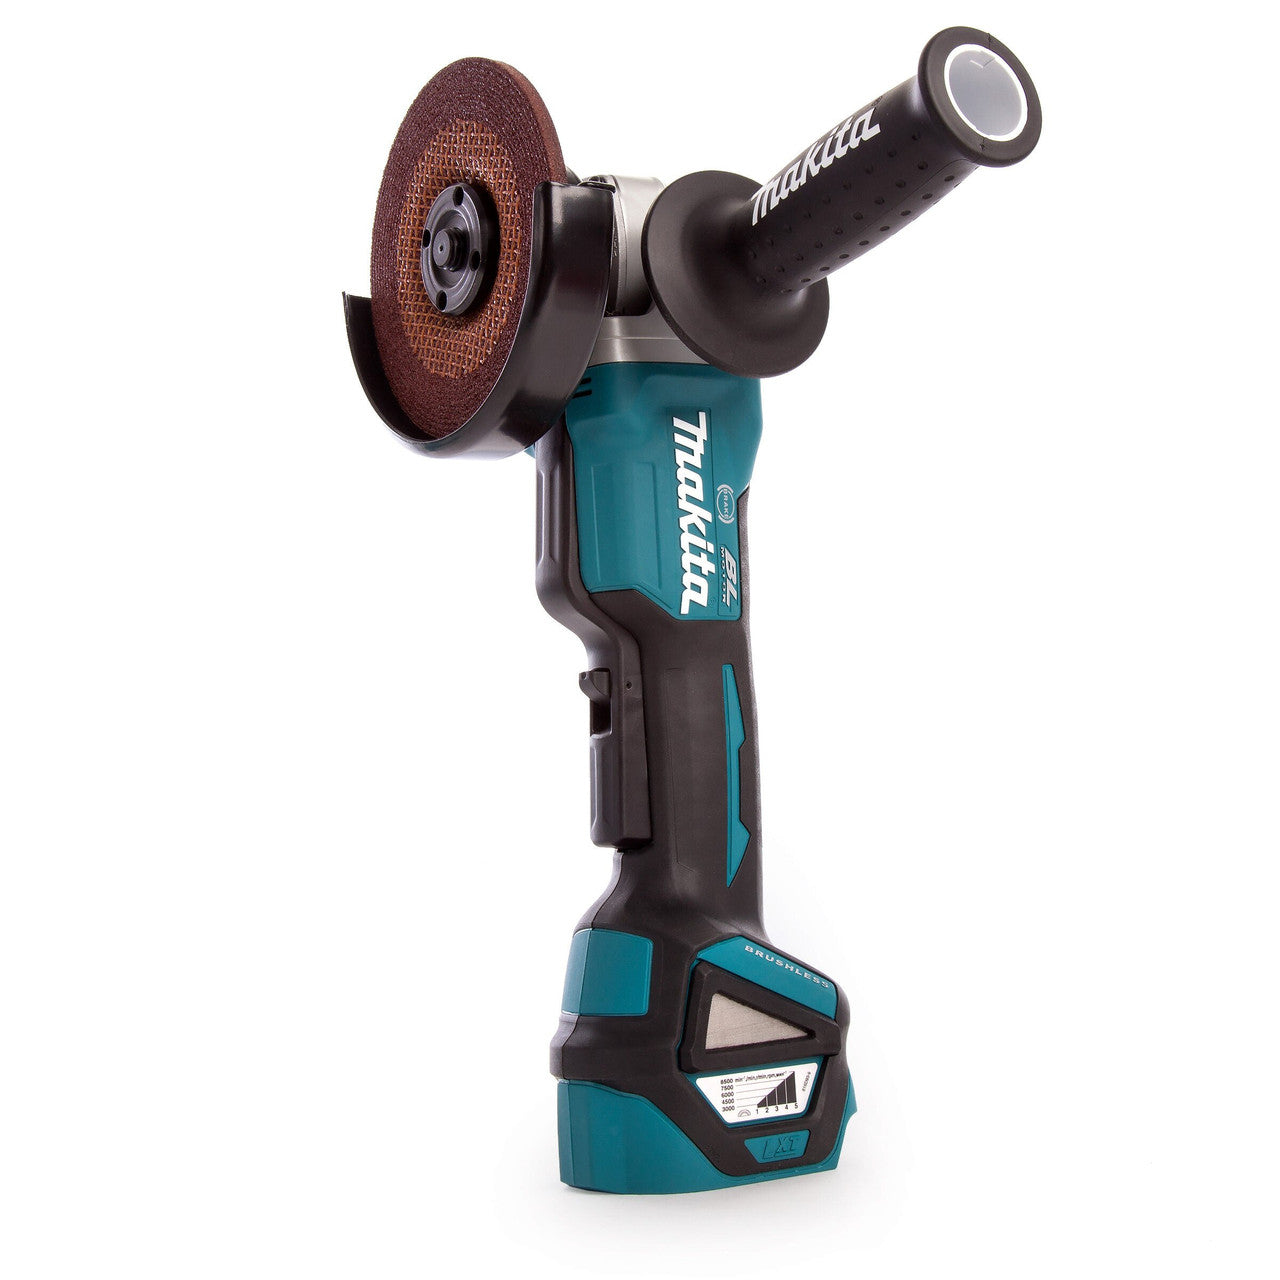 Makita DGA517Z 18V LXT 5 inch/125mm Brushless Angle Grinder (Body Only)